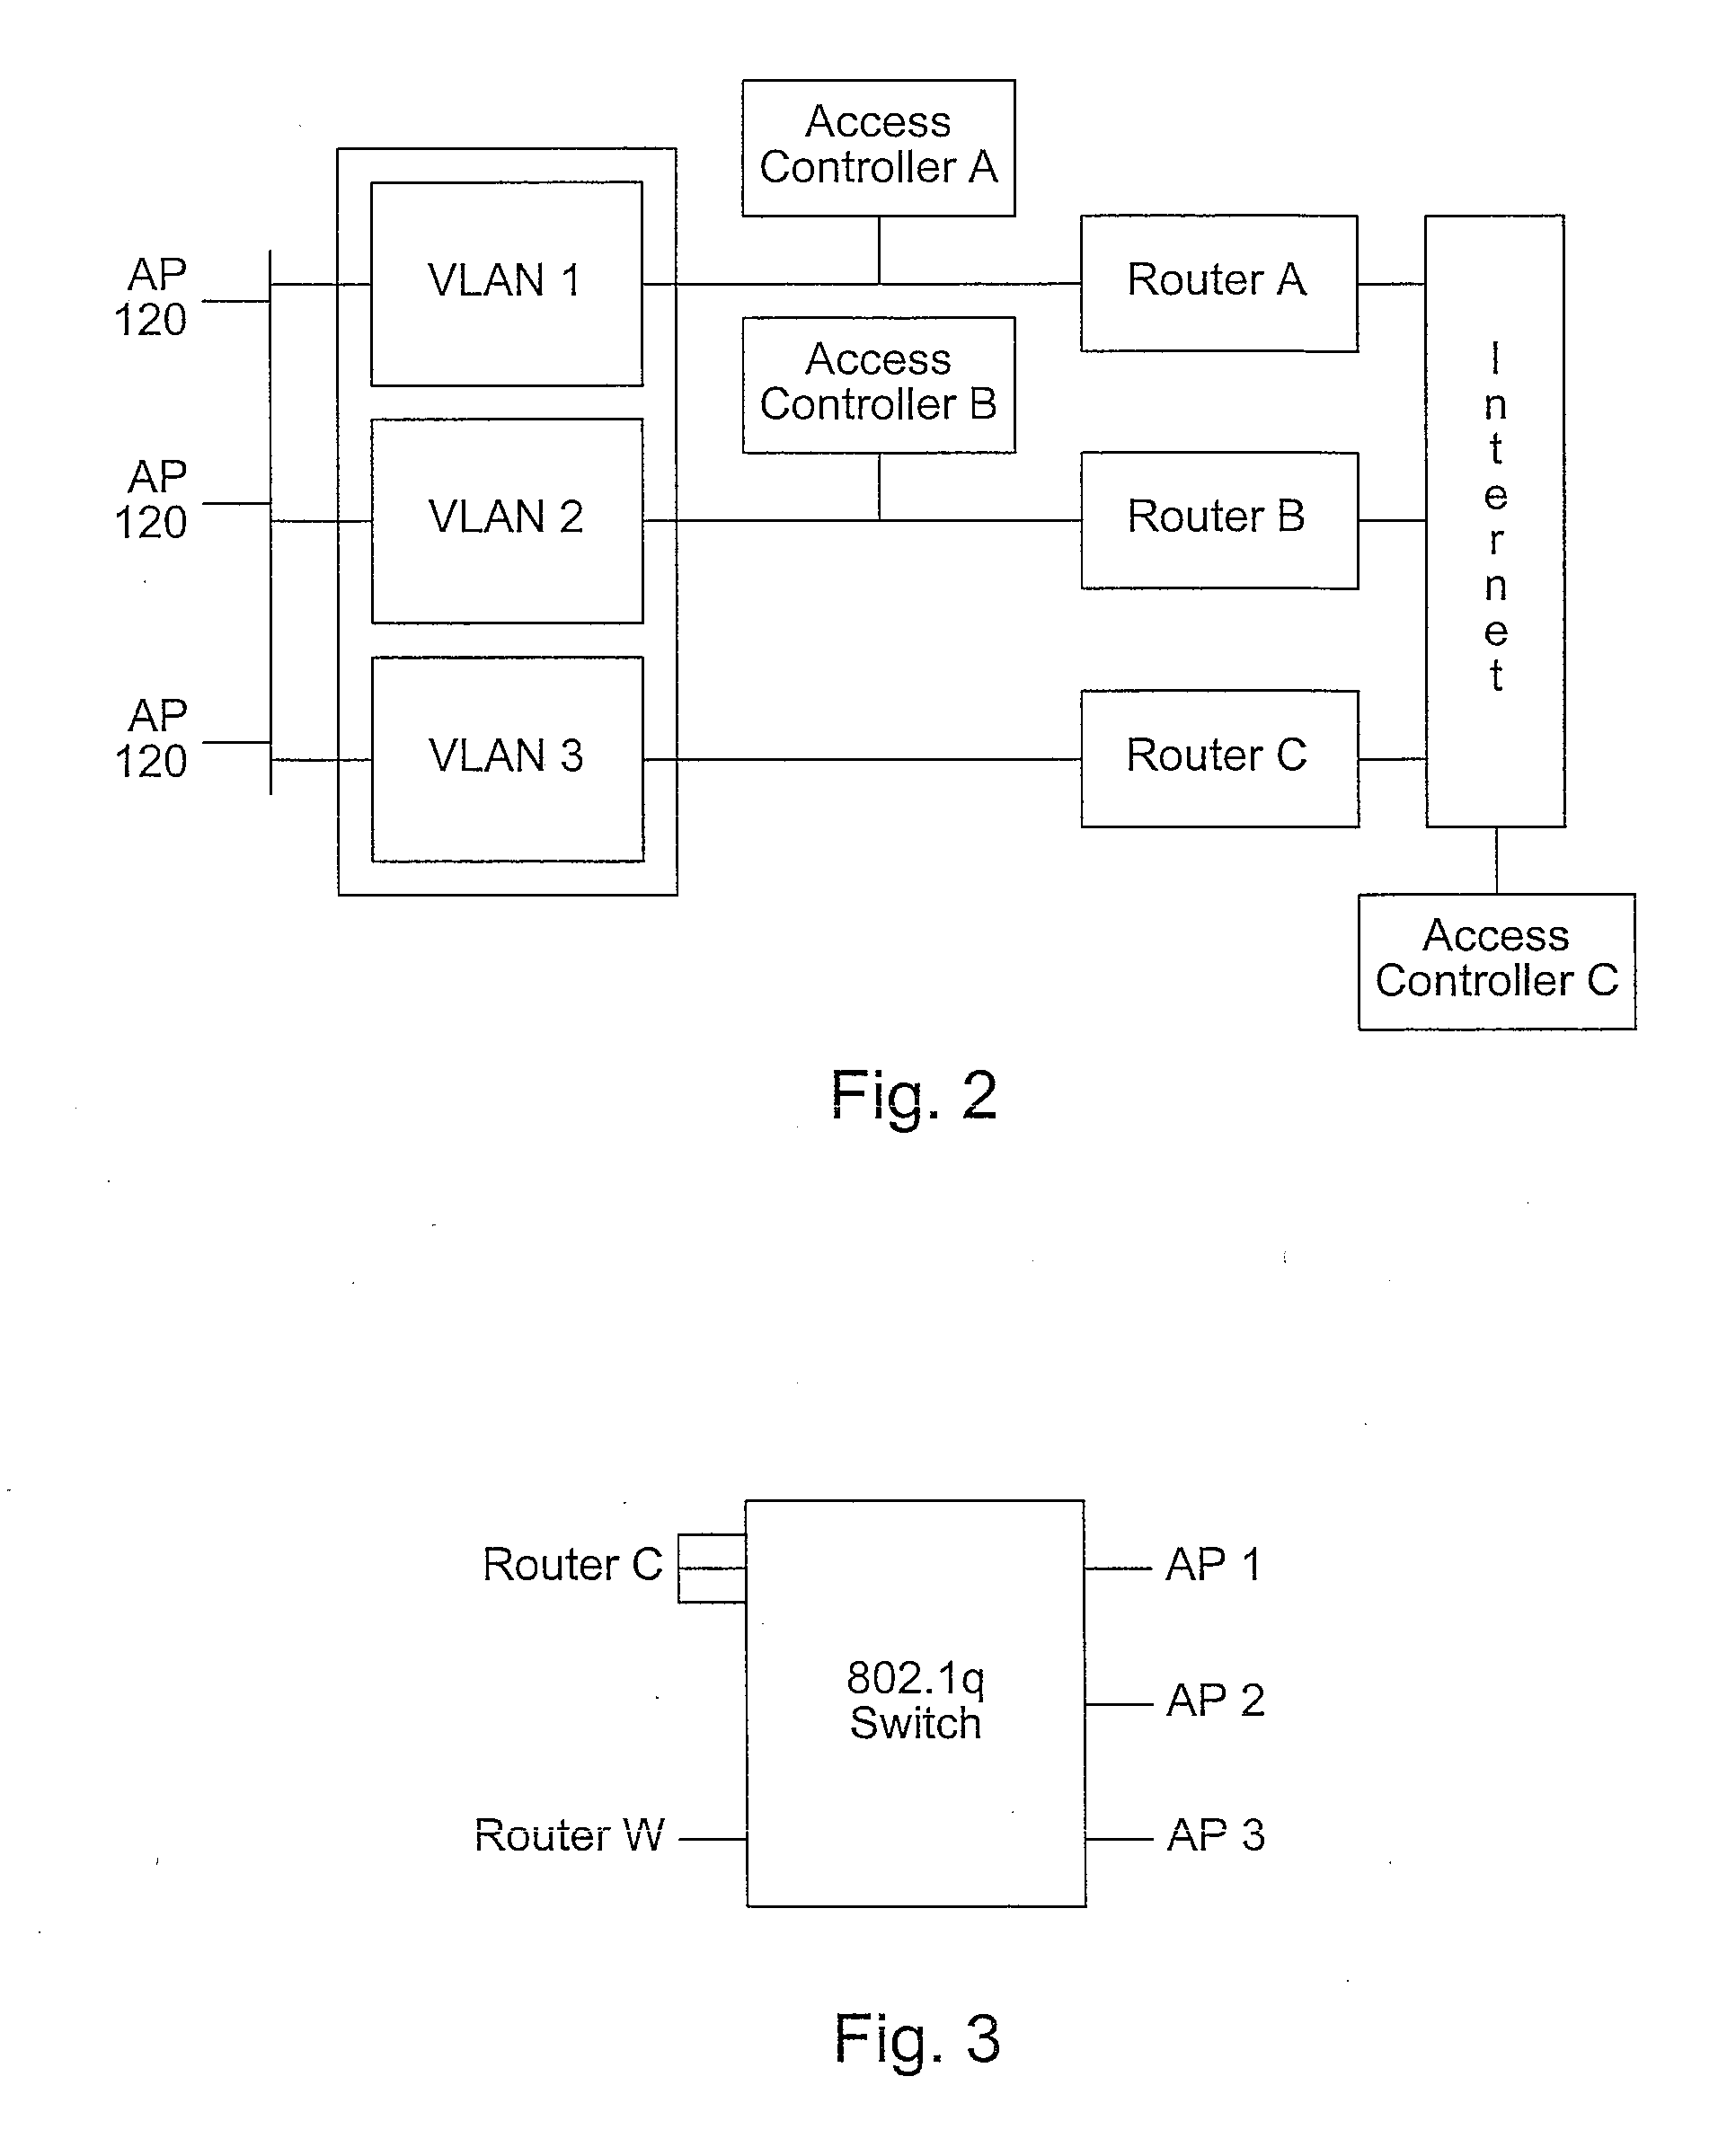 Authorization and authentication of user access to a distributed network communication system with roaming feature